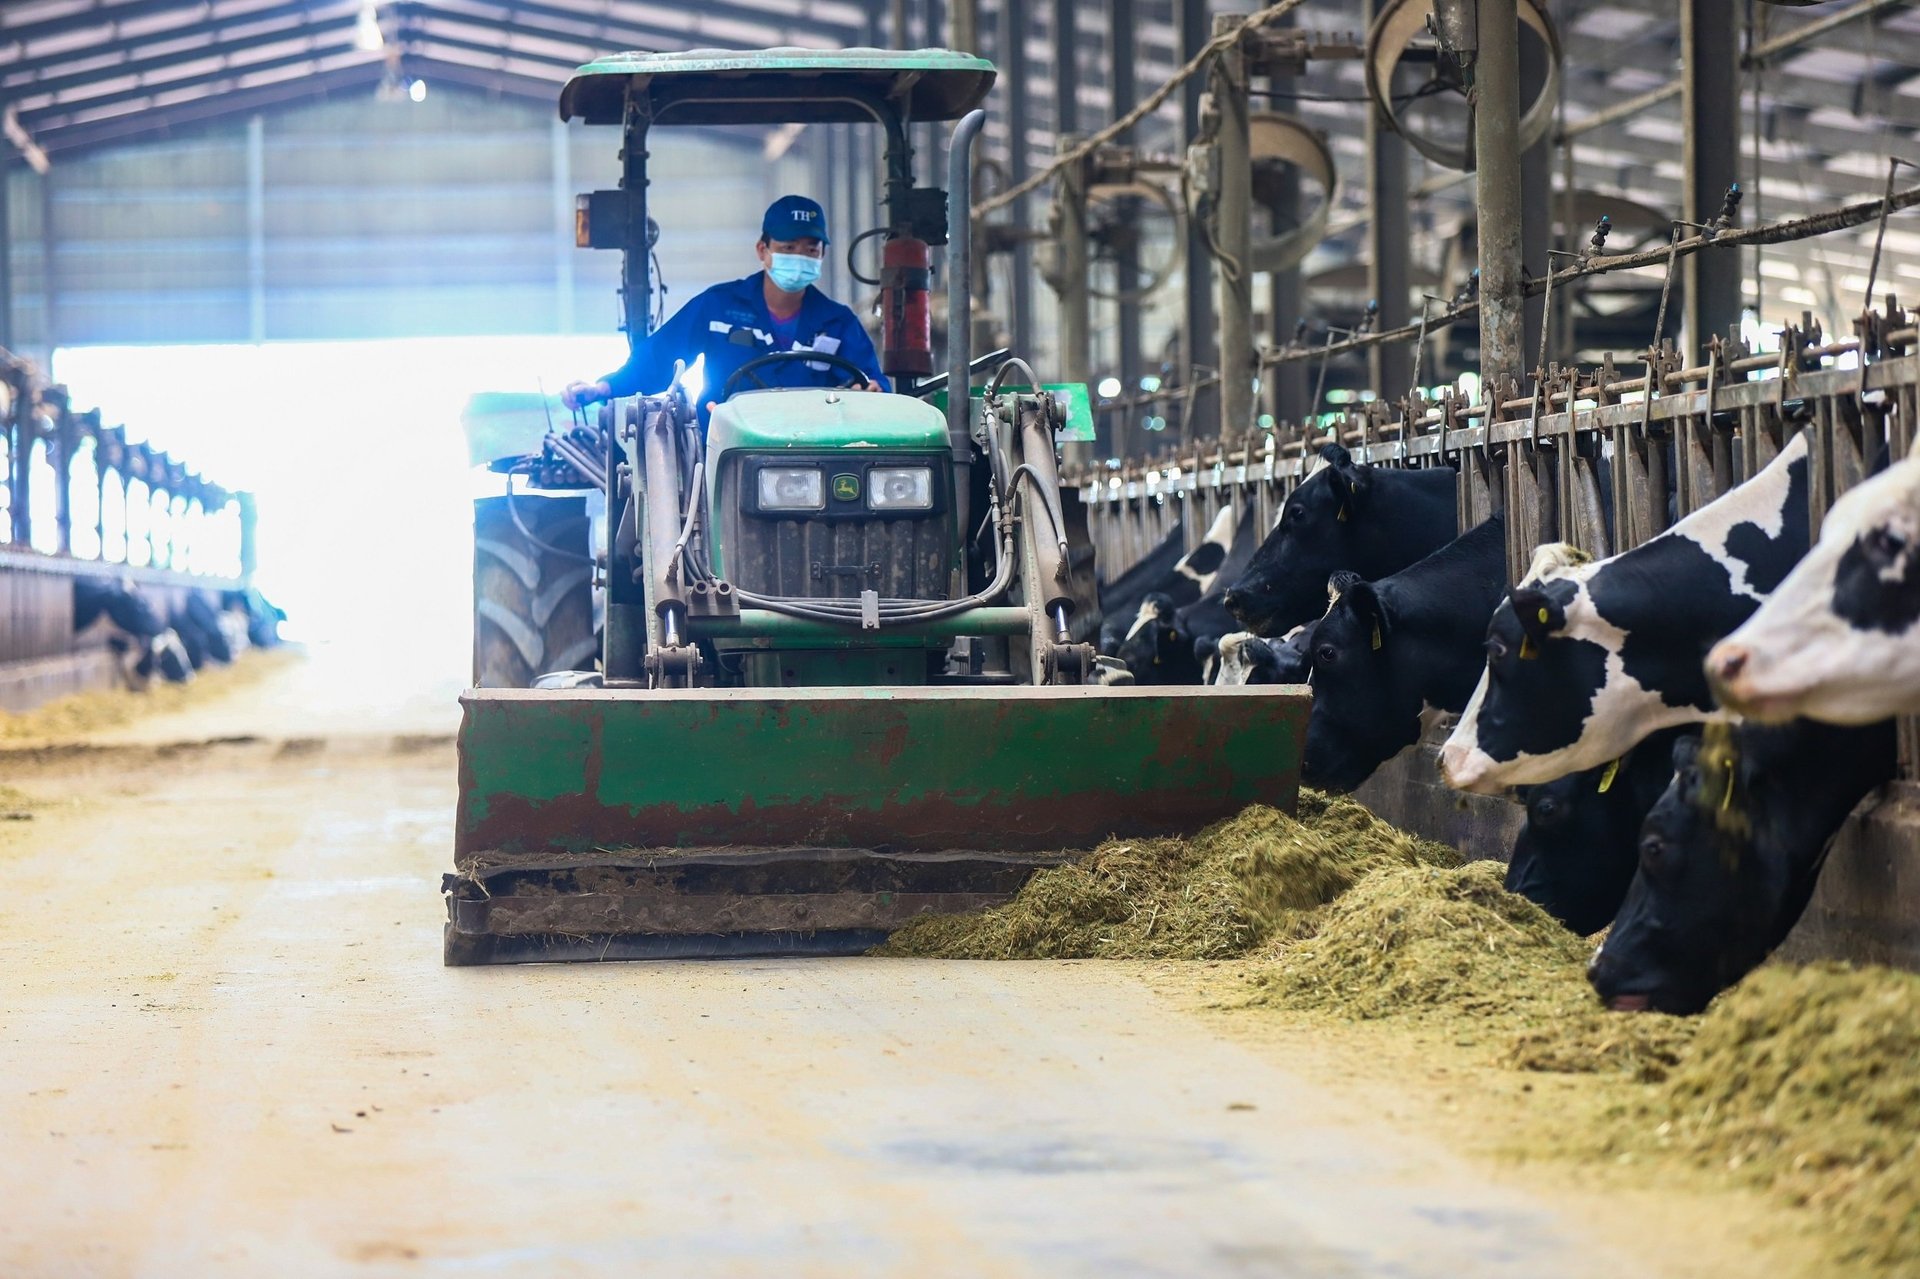 Feed formulas and diets for each group of dairy cows are built using the world's leading advanced nutritional software.